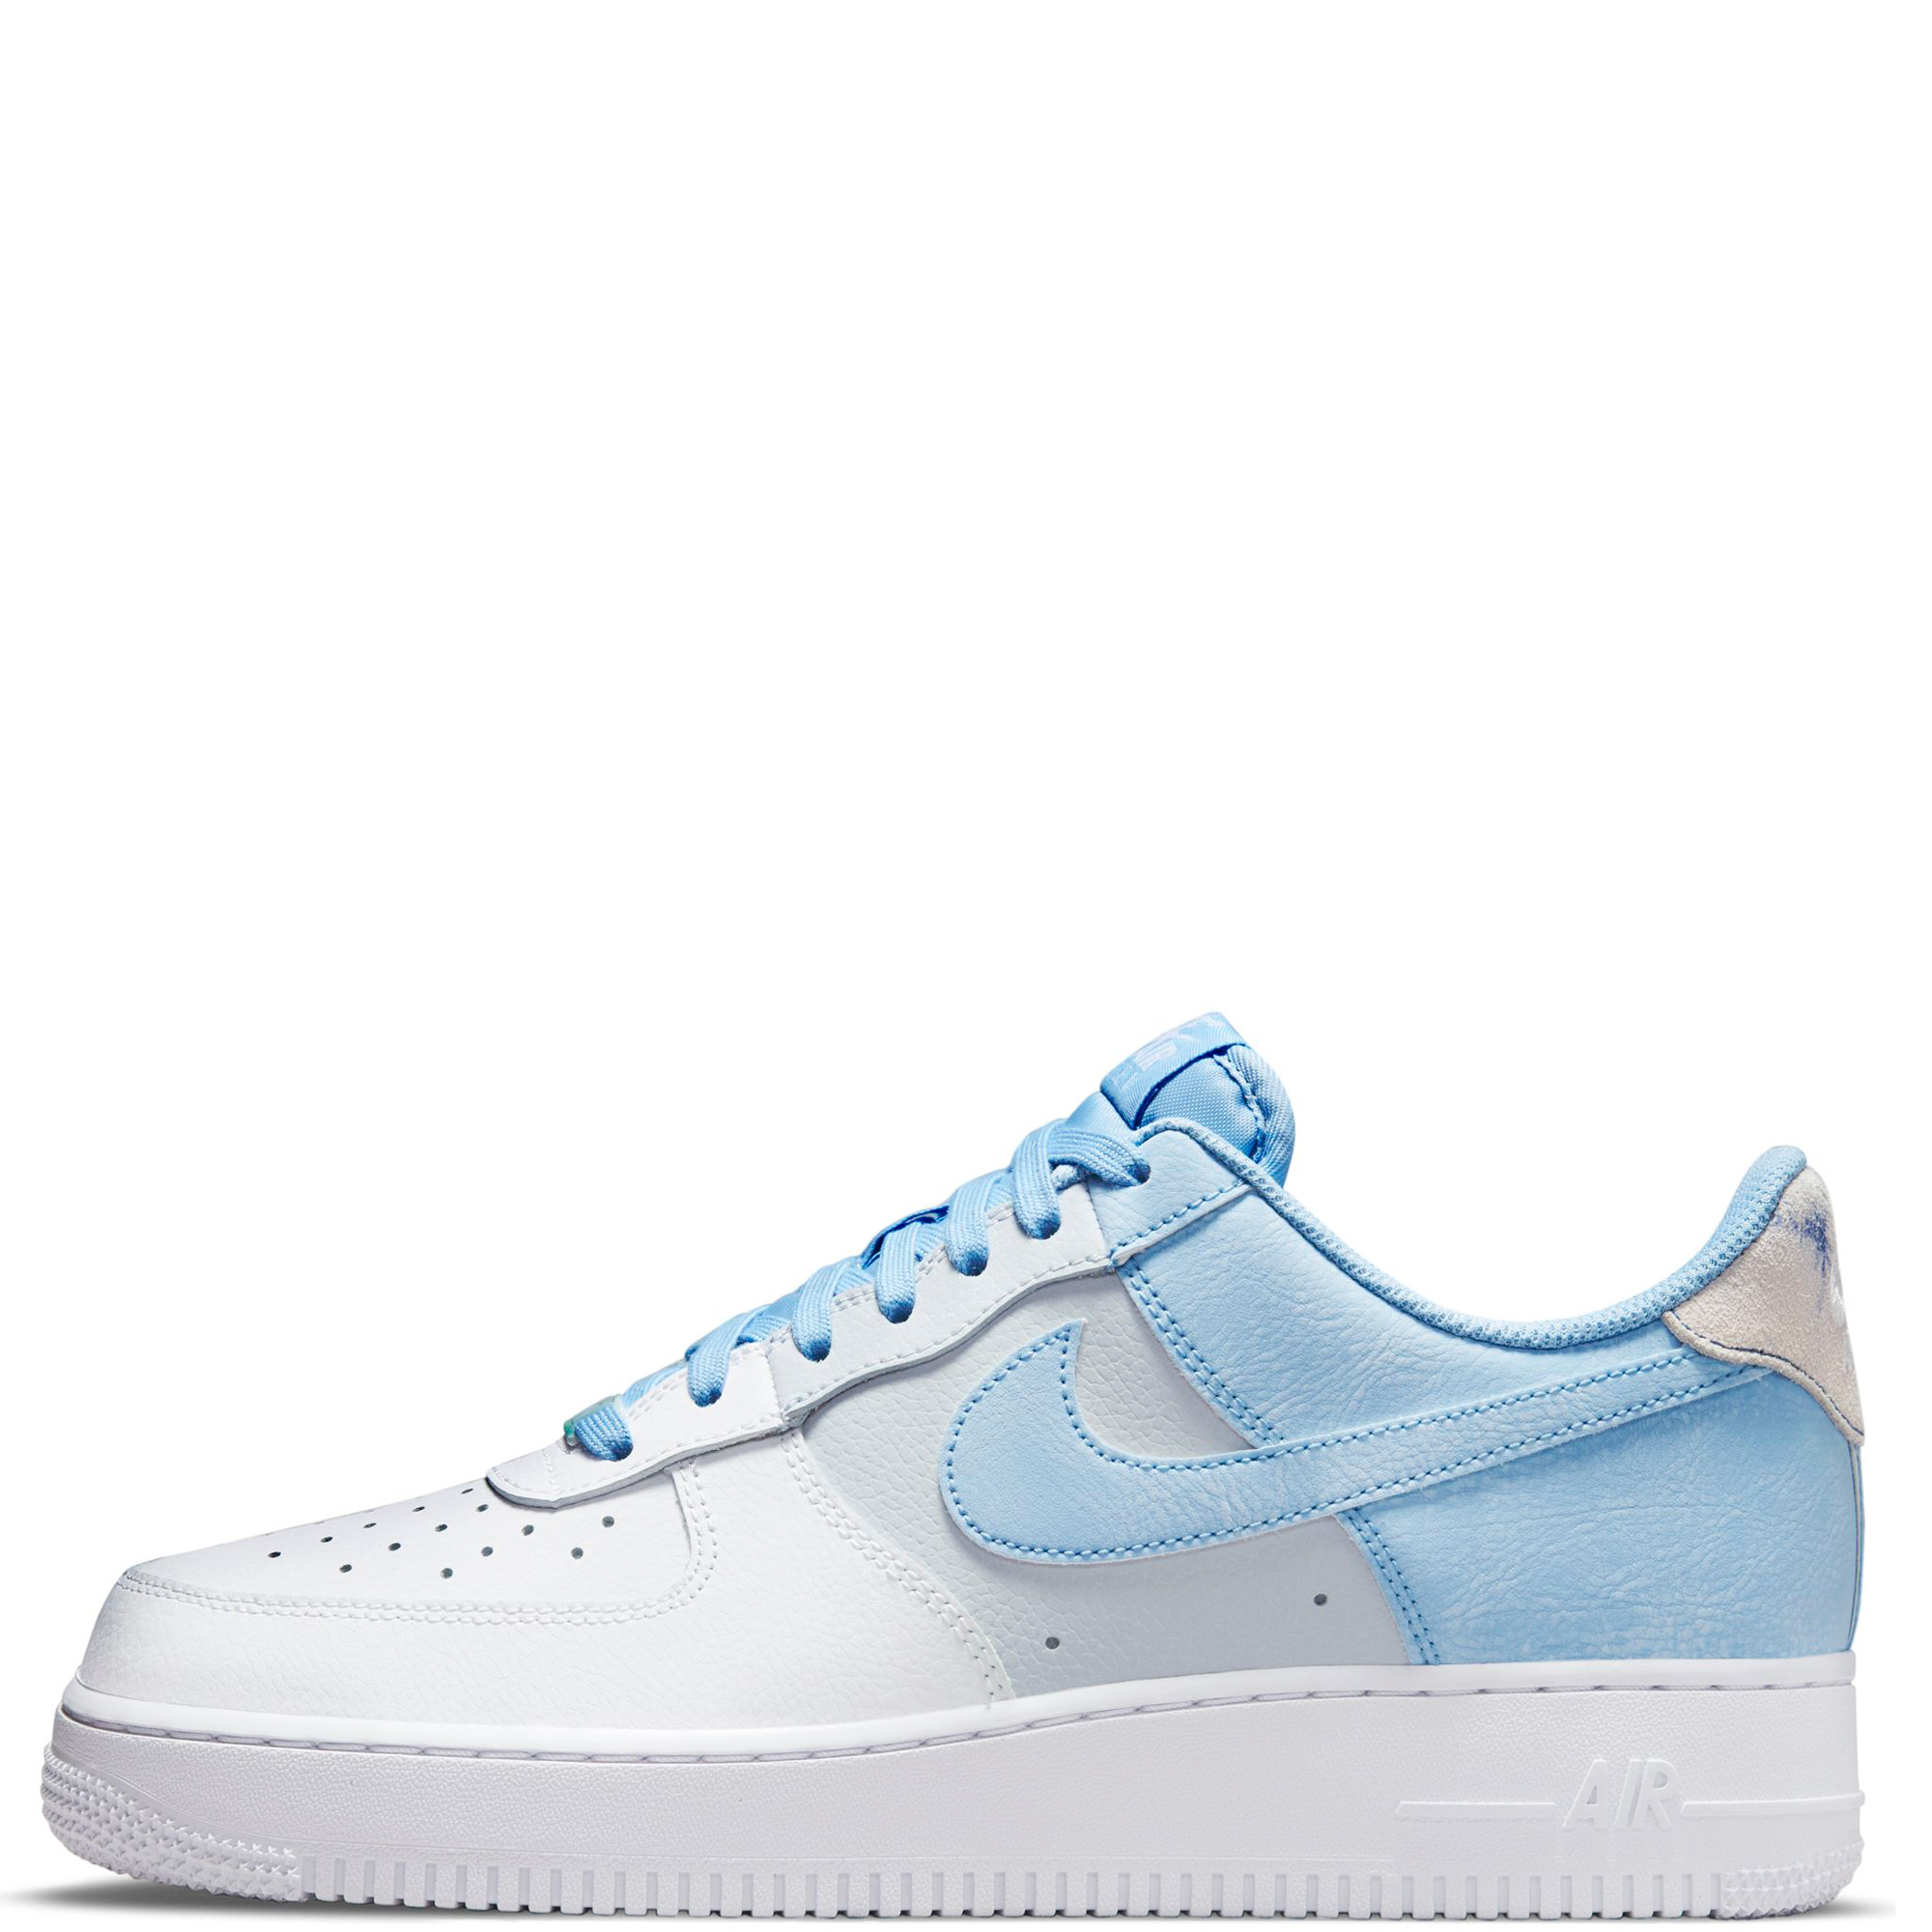 Mens Nike Air Force 1 '07 LV8 Size 13 Shoes Psychic Blue Grey